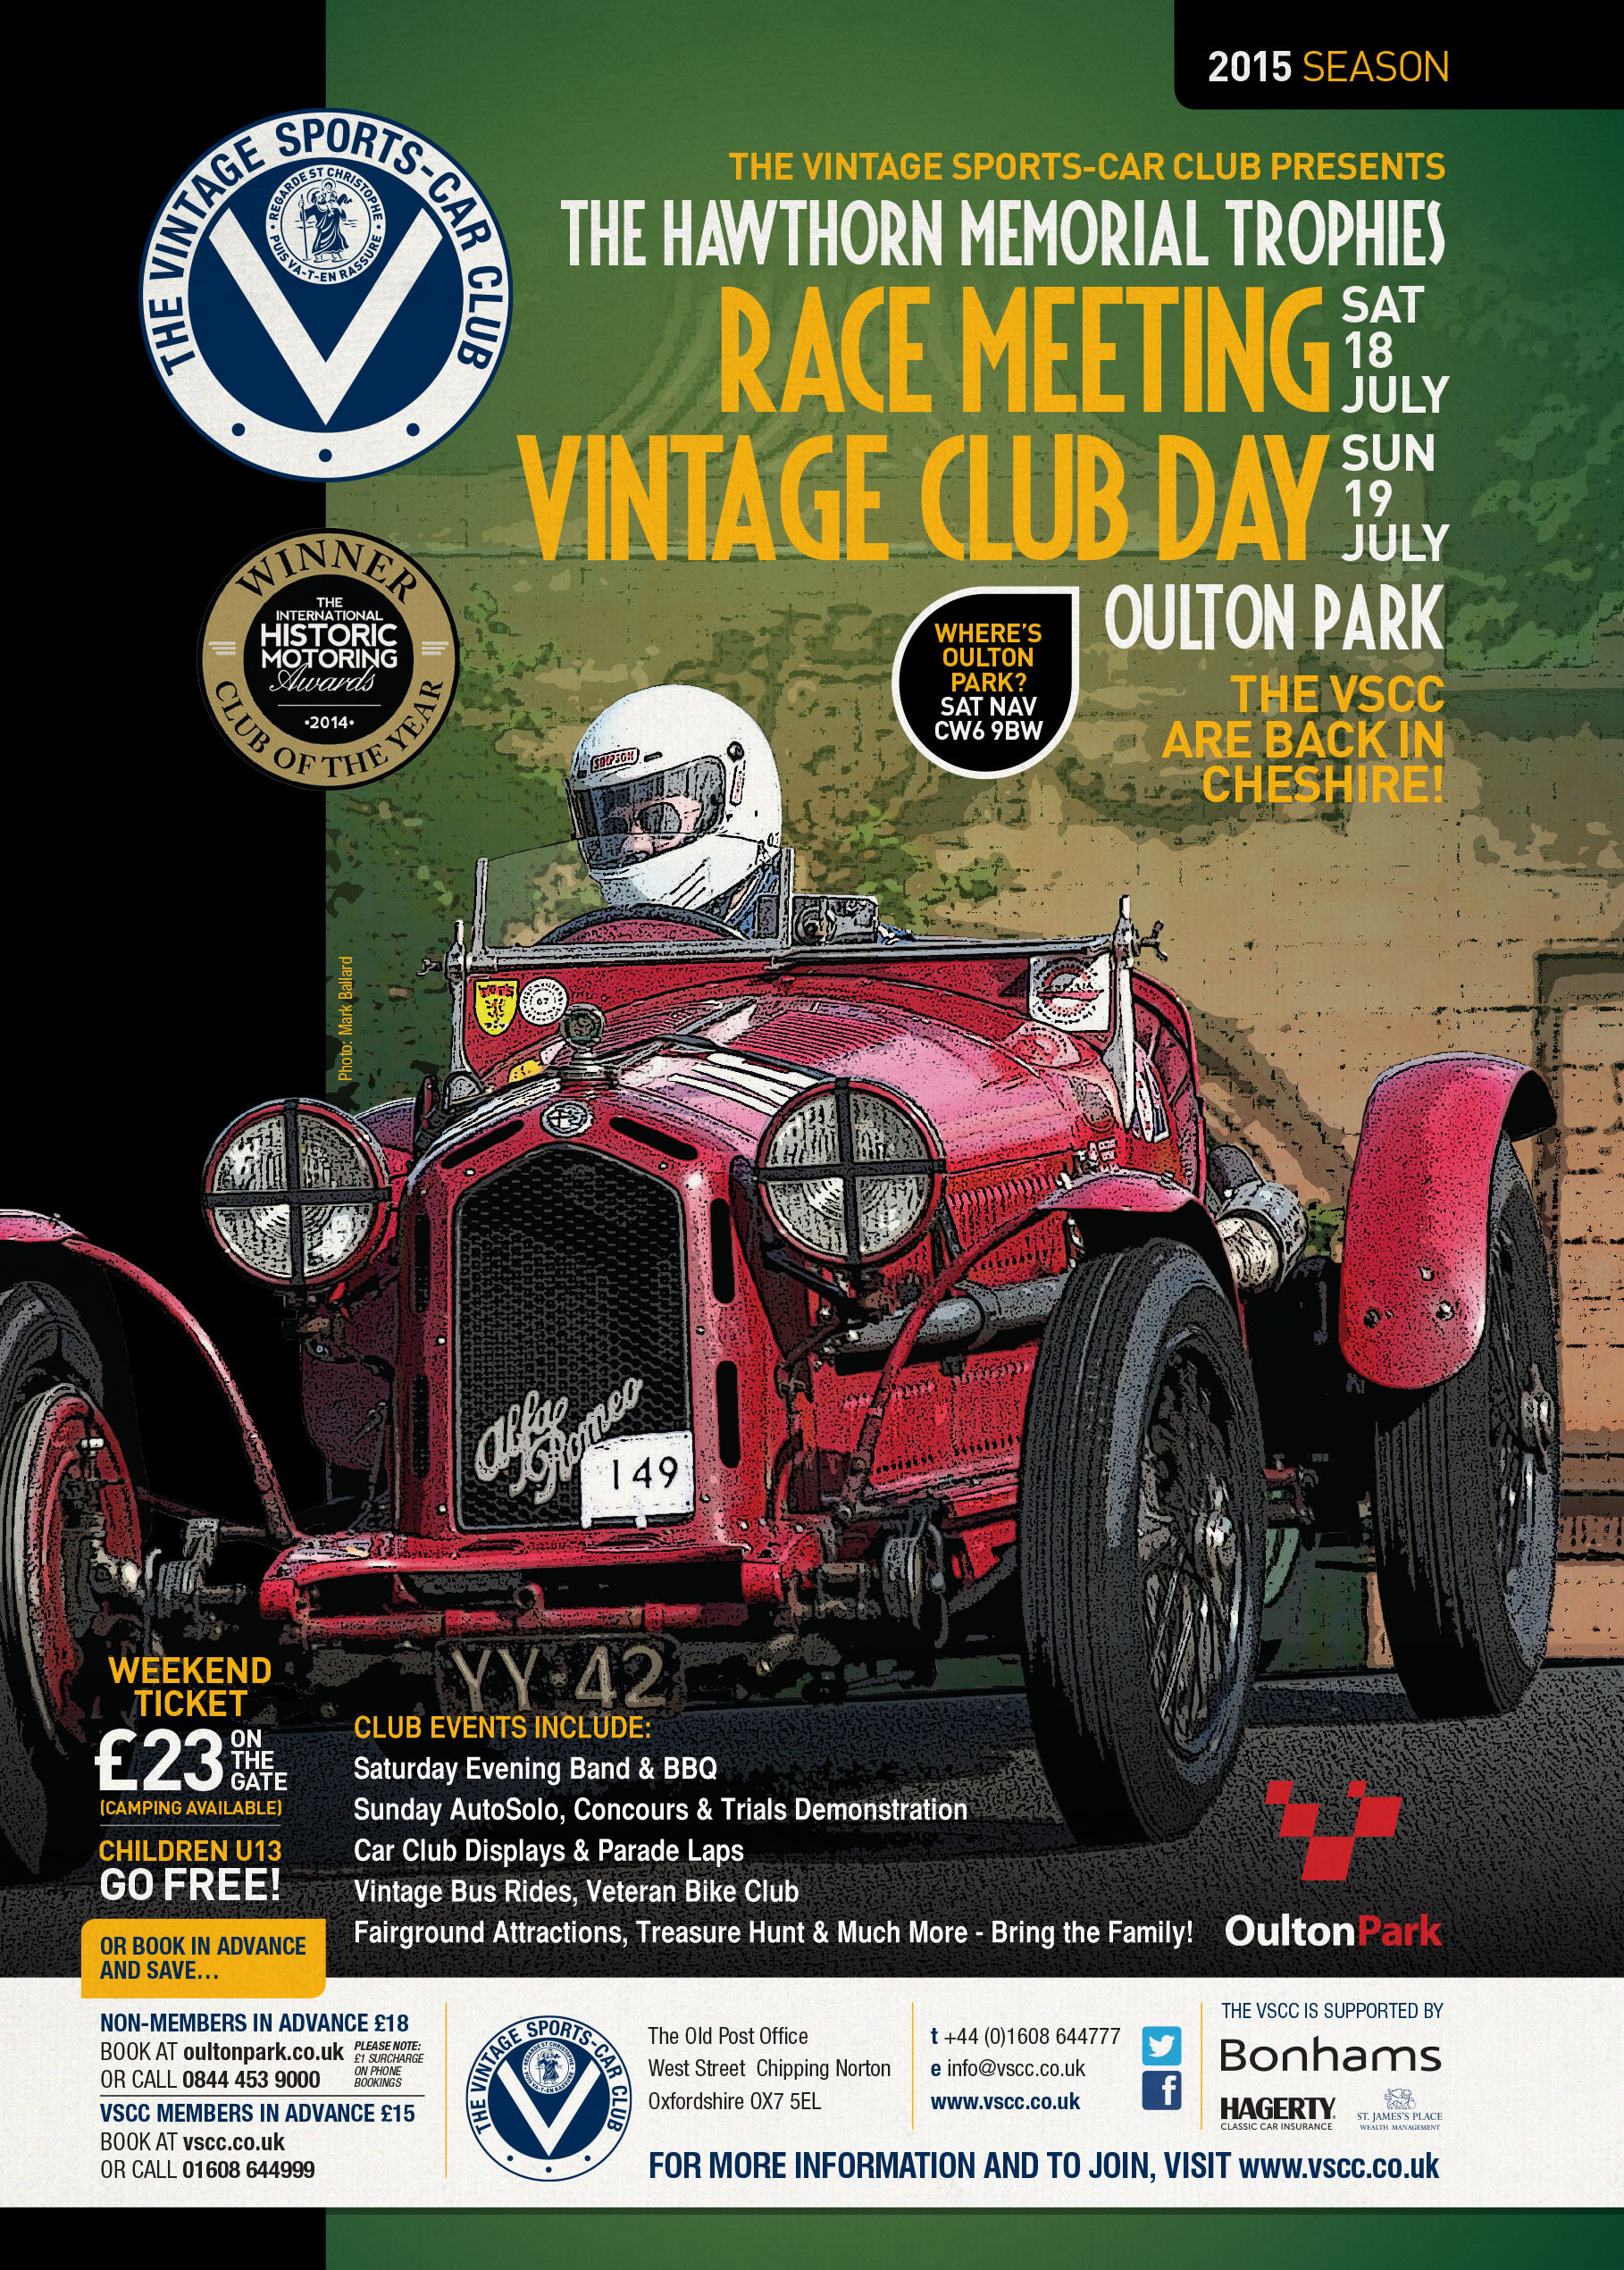 The Vintage Sports-Car Club returns to Oulton Park  for a Vintage Weekend this July cover